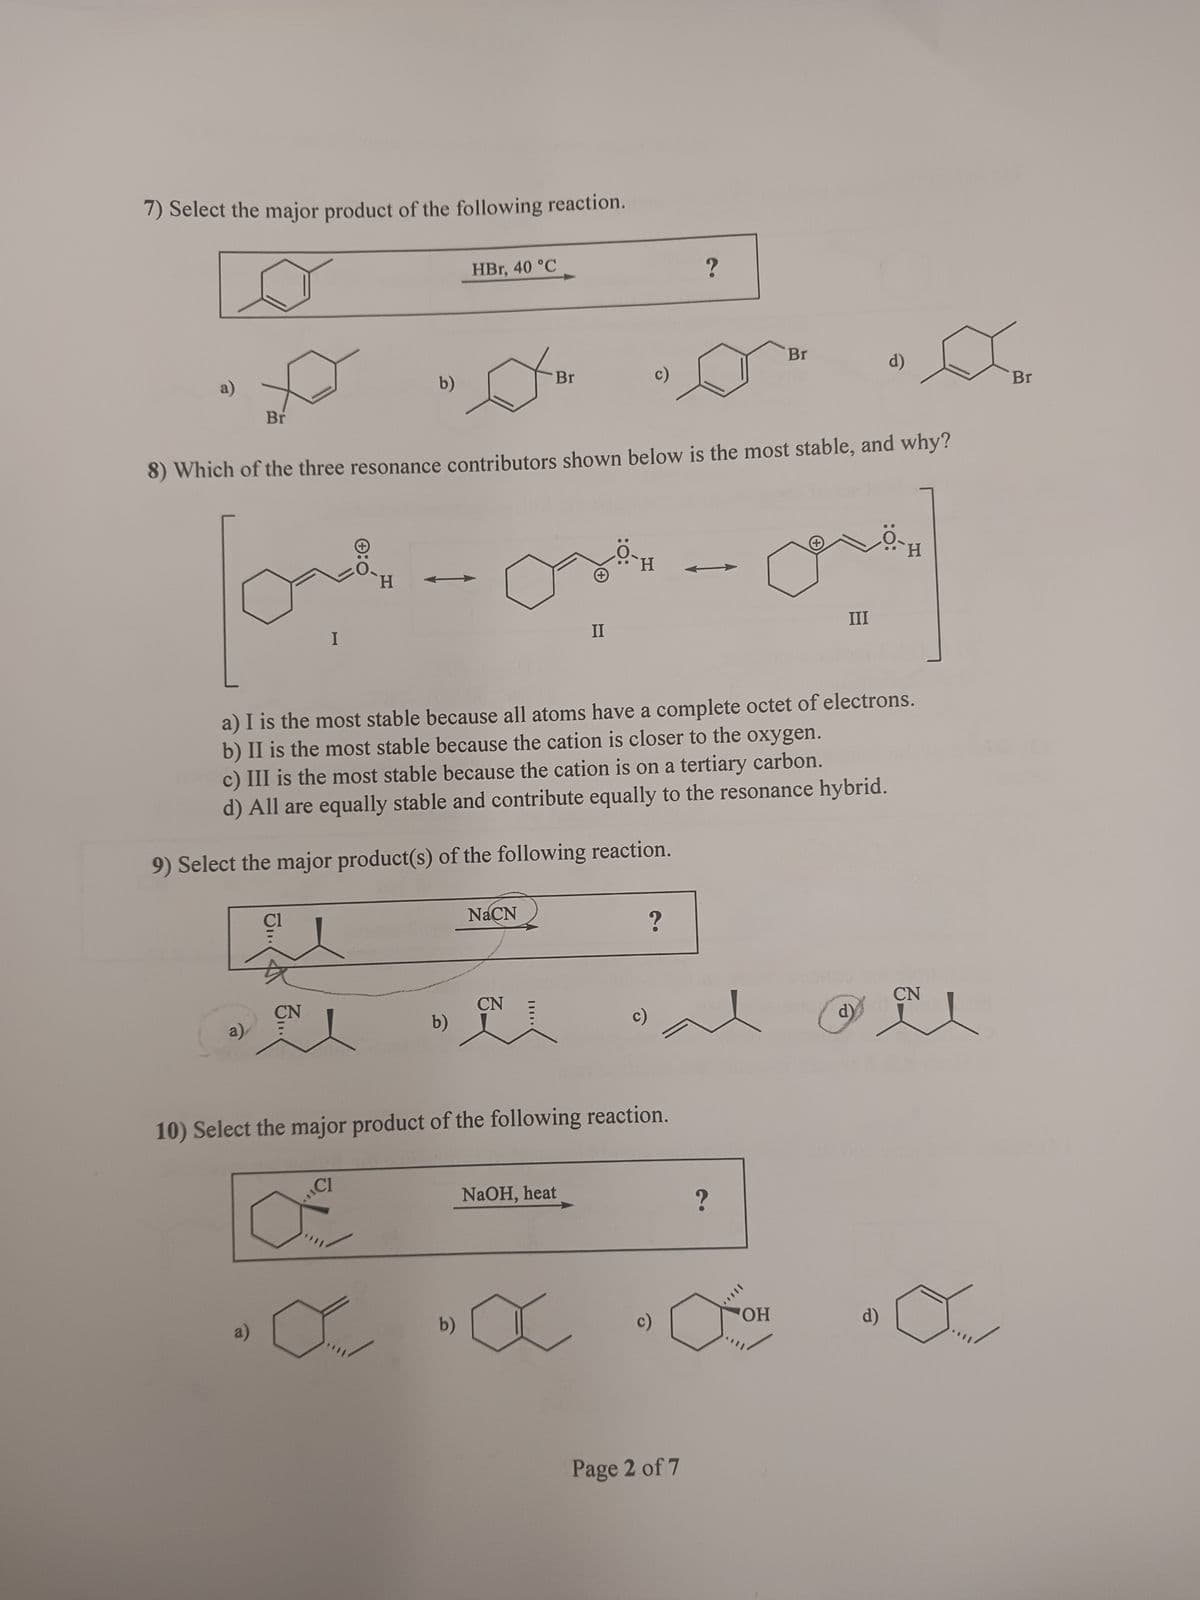 7) Select the major product of the following reaction.
love
I
D
Br
8) Which of the three resonance contributors shown below is the most stable, and why?
b)
a)
HBr, 40 °C
CI
b)
o
9) Select the major product(s) of the following reaction.
b)
Br
NaCN
a) I is the most stable because all atoms have a complete octet of electrons.
b) II is the most stable because the cation is closer to the oxygen.
c) III is the most stable because the cation is on a tertiary carbon.
d) All are equally stable and contribute equally to the resonance hybrid.
CN
c)
H
10) Select the major product of the following reaction.
NaOH, heat
?
?
Page 2 of 7
?
Br
OH
III
d)
d)
d)
CN
e
Br